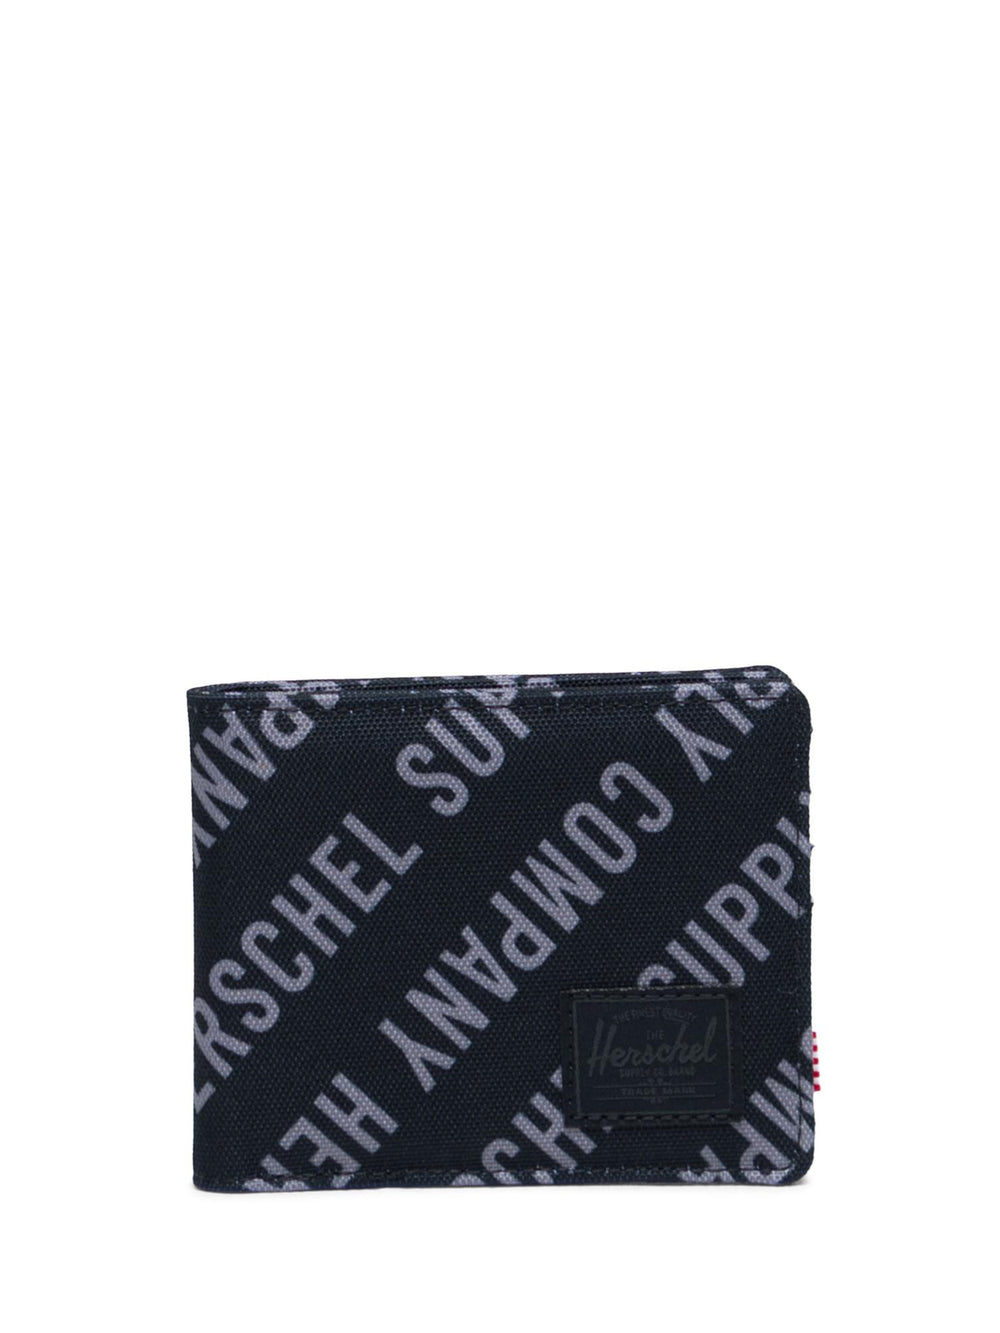 HERSCHEL SUPPLY CO. ROY - ROLLCALL BLACK - CLEARANCE